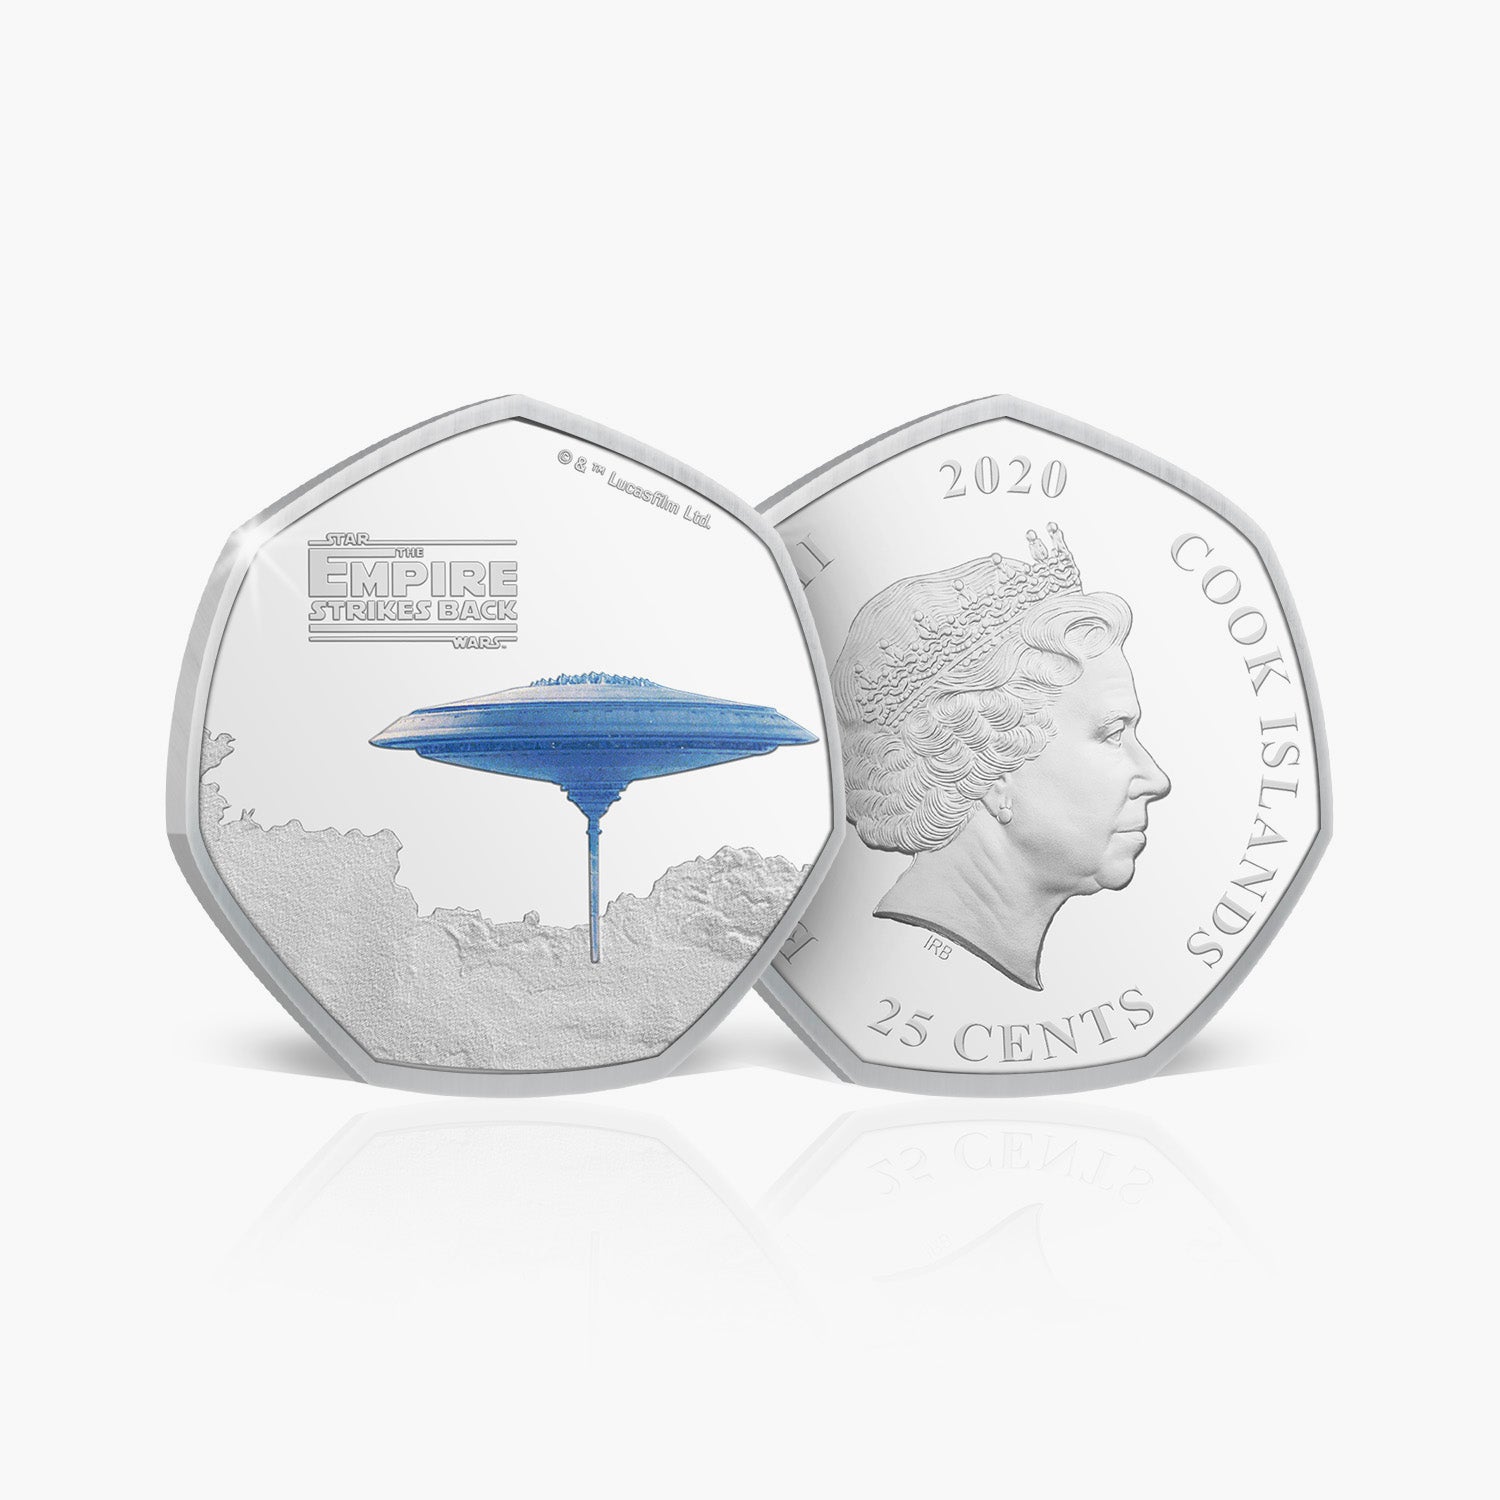 Bespin Silver Plated Coin